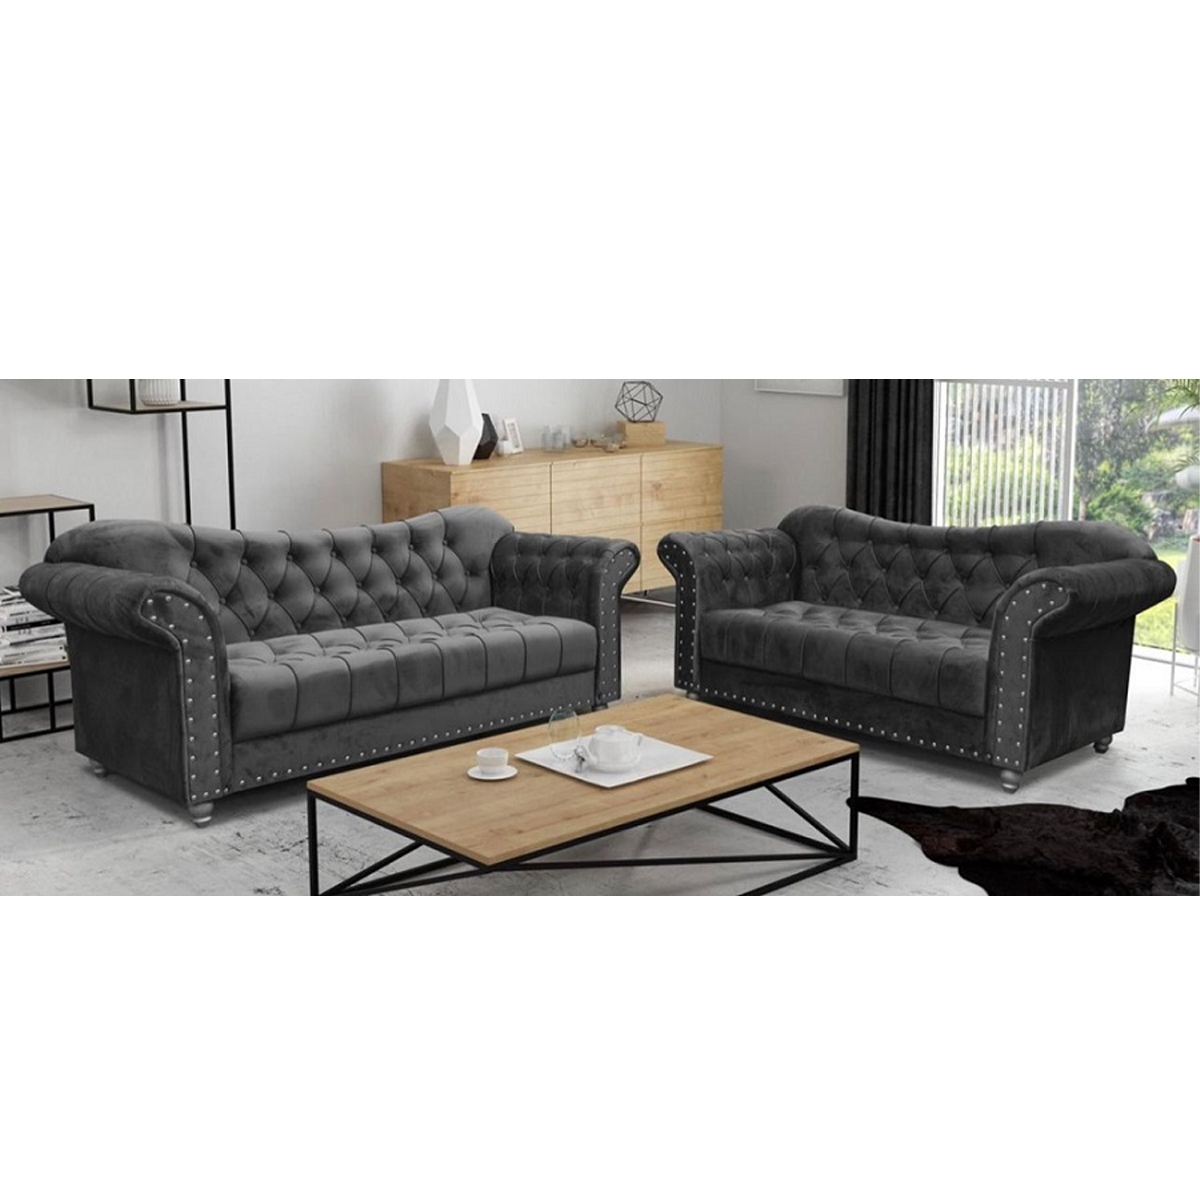 Chesterfield Elegance Grey Fabric 3 + 2 Seater Sofa Set – The Online Sofa Shop